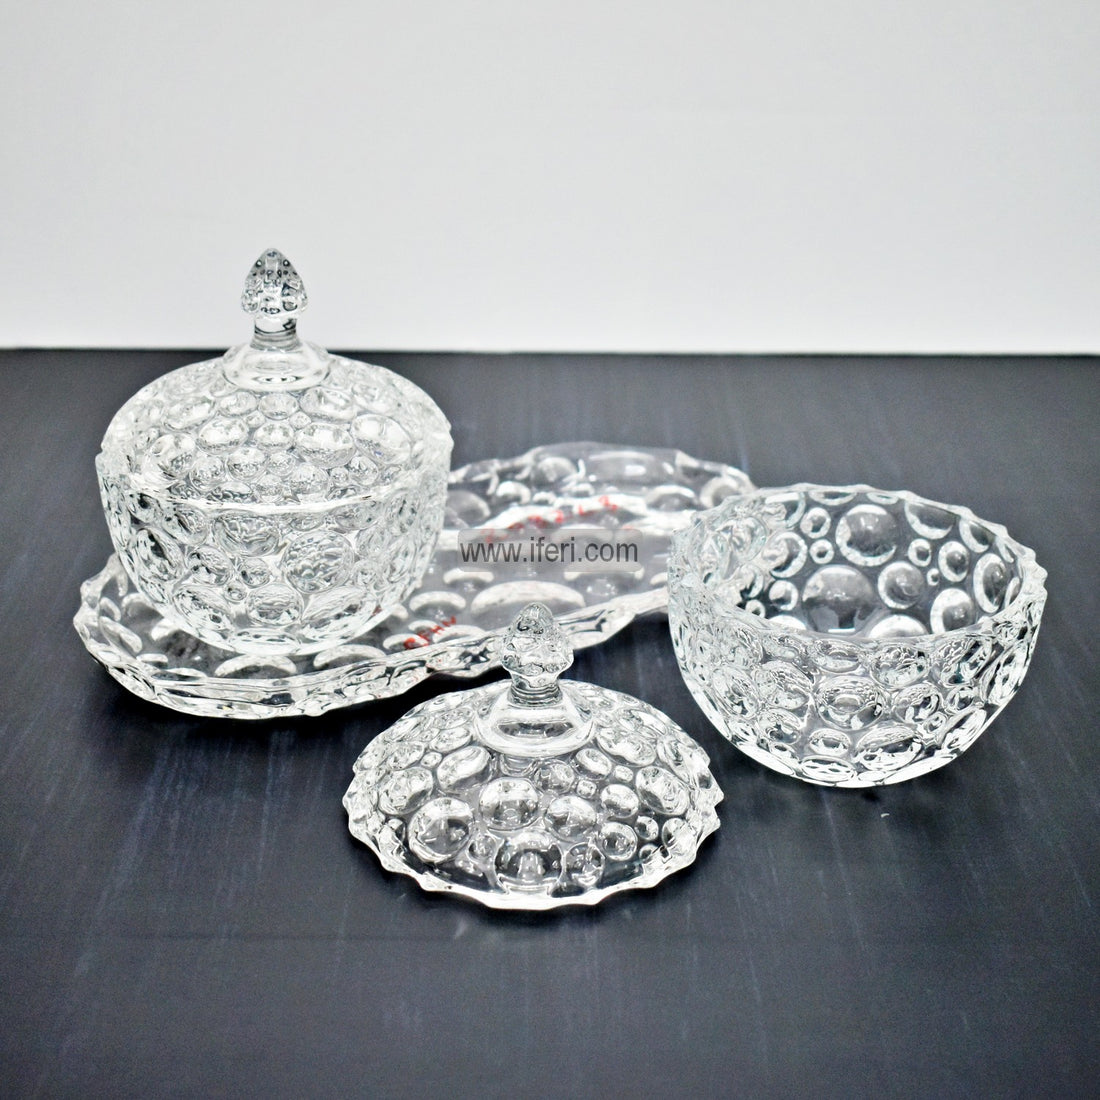 Buy Crystal Glass Candy Box, Dry Fruit Serving Bowl with Tray Online Through iferi.com from Bangladesh